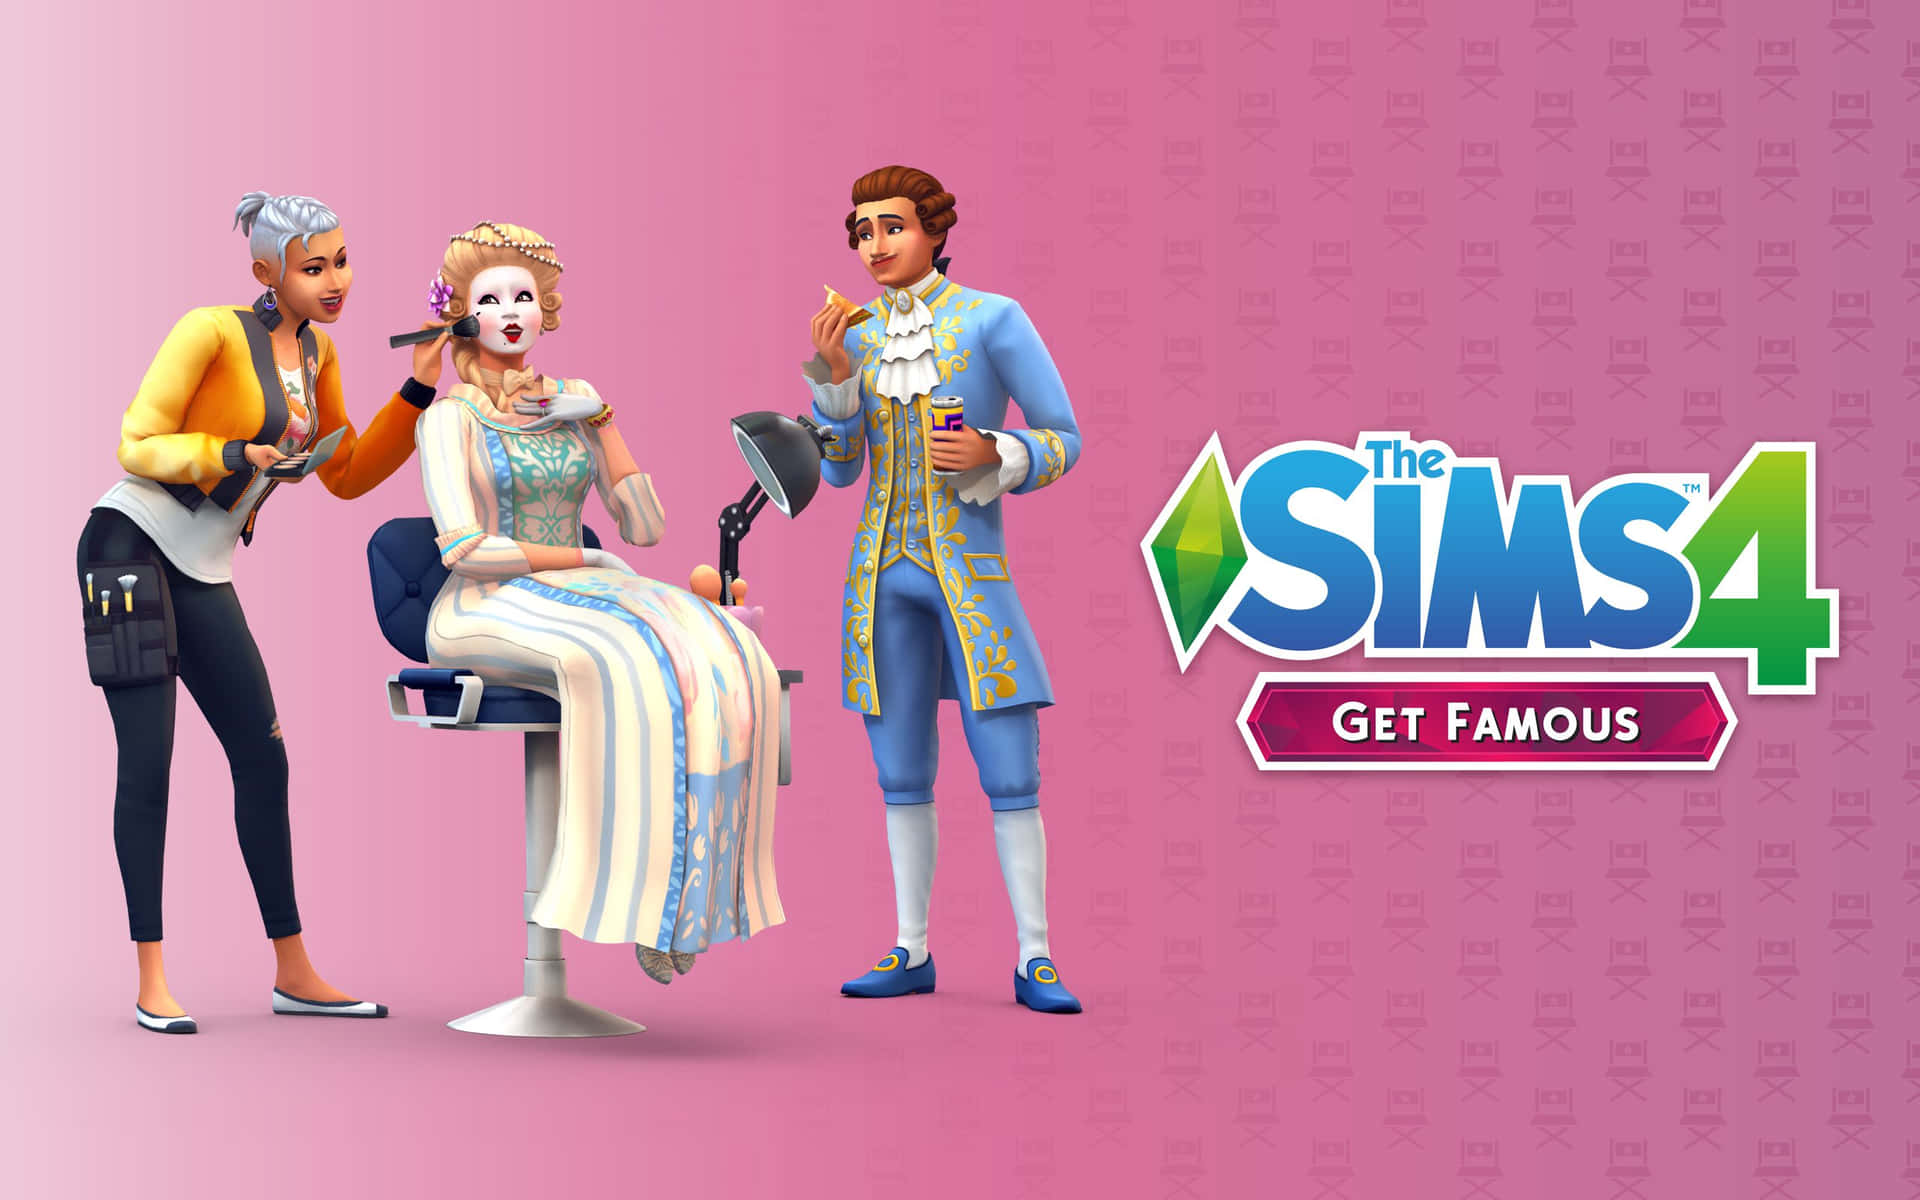 The Sims 4 – A Colorful Life Simulation Adventure Wallpaper